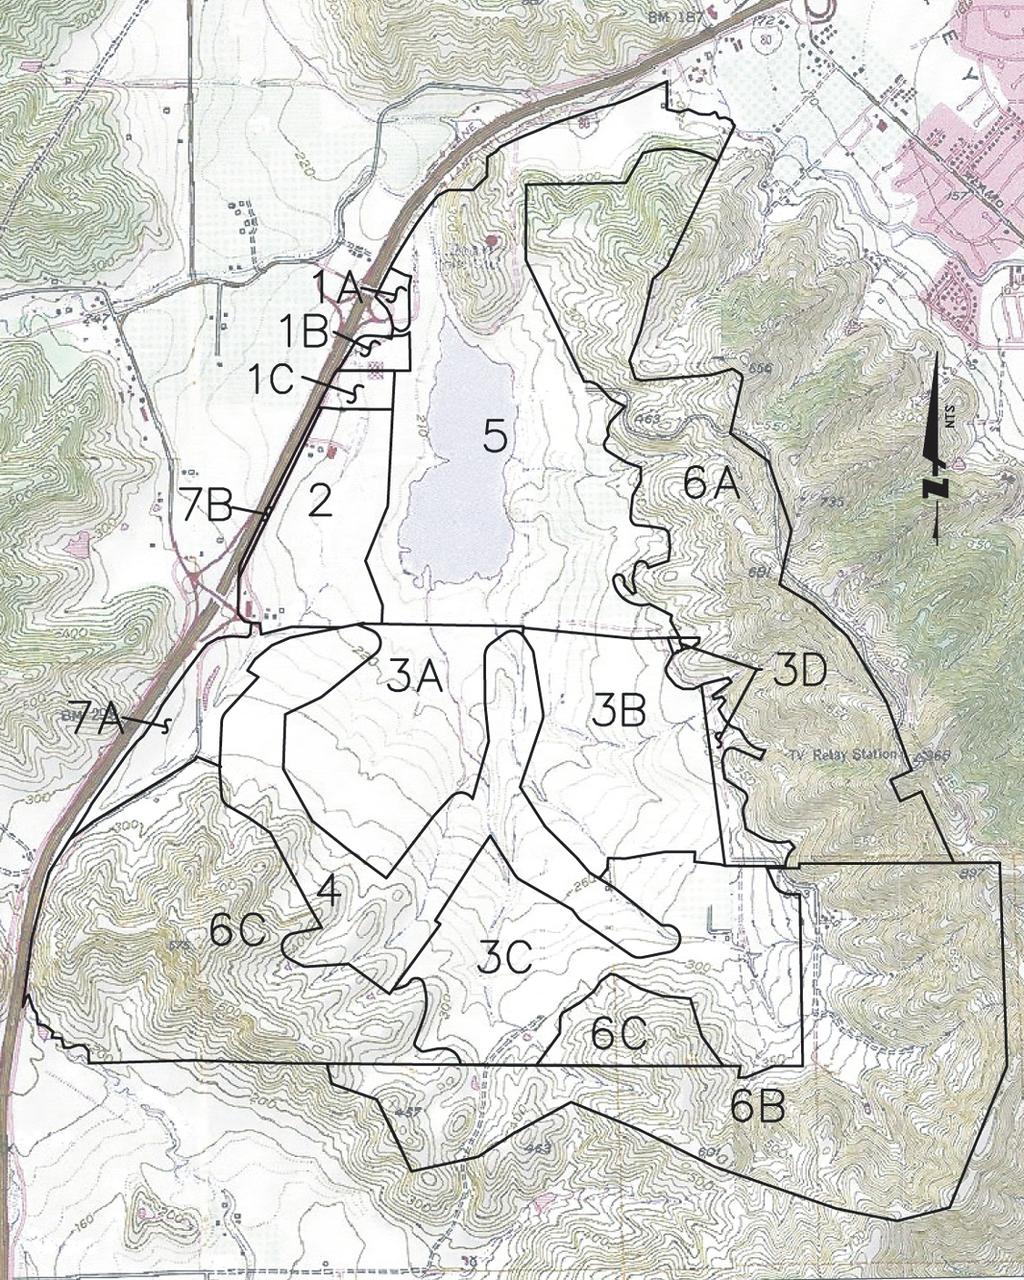 FIGURE 3-4 Not to Scale Lower Lagoon Valley Land Use Plan